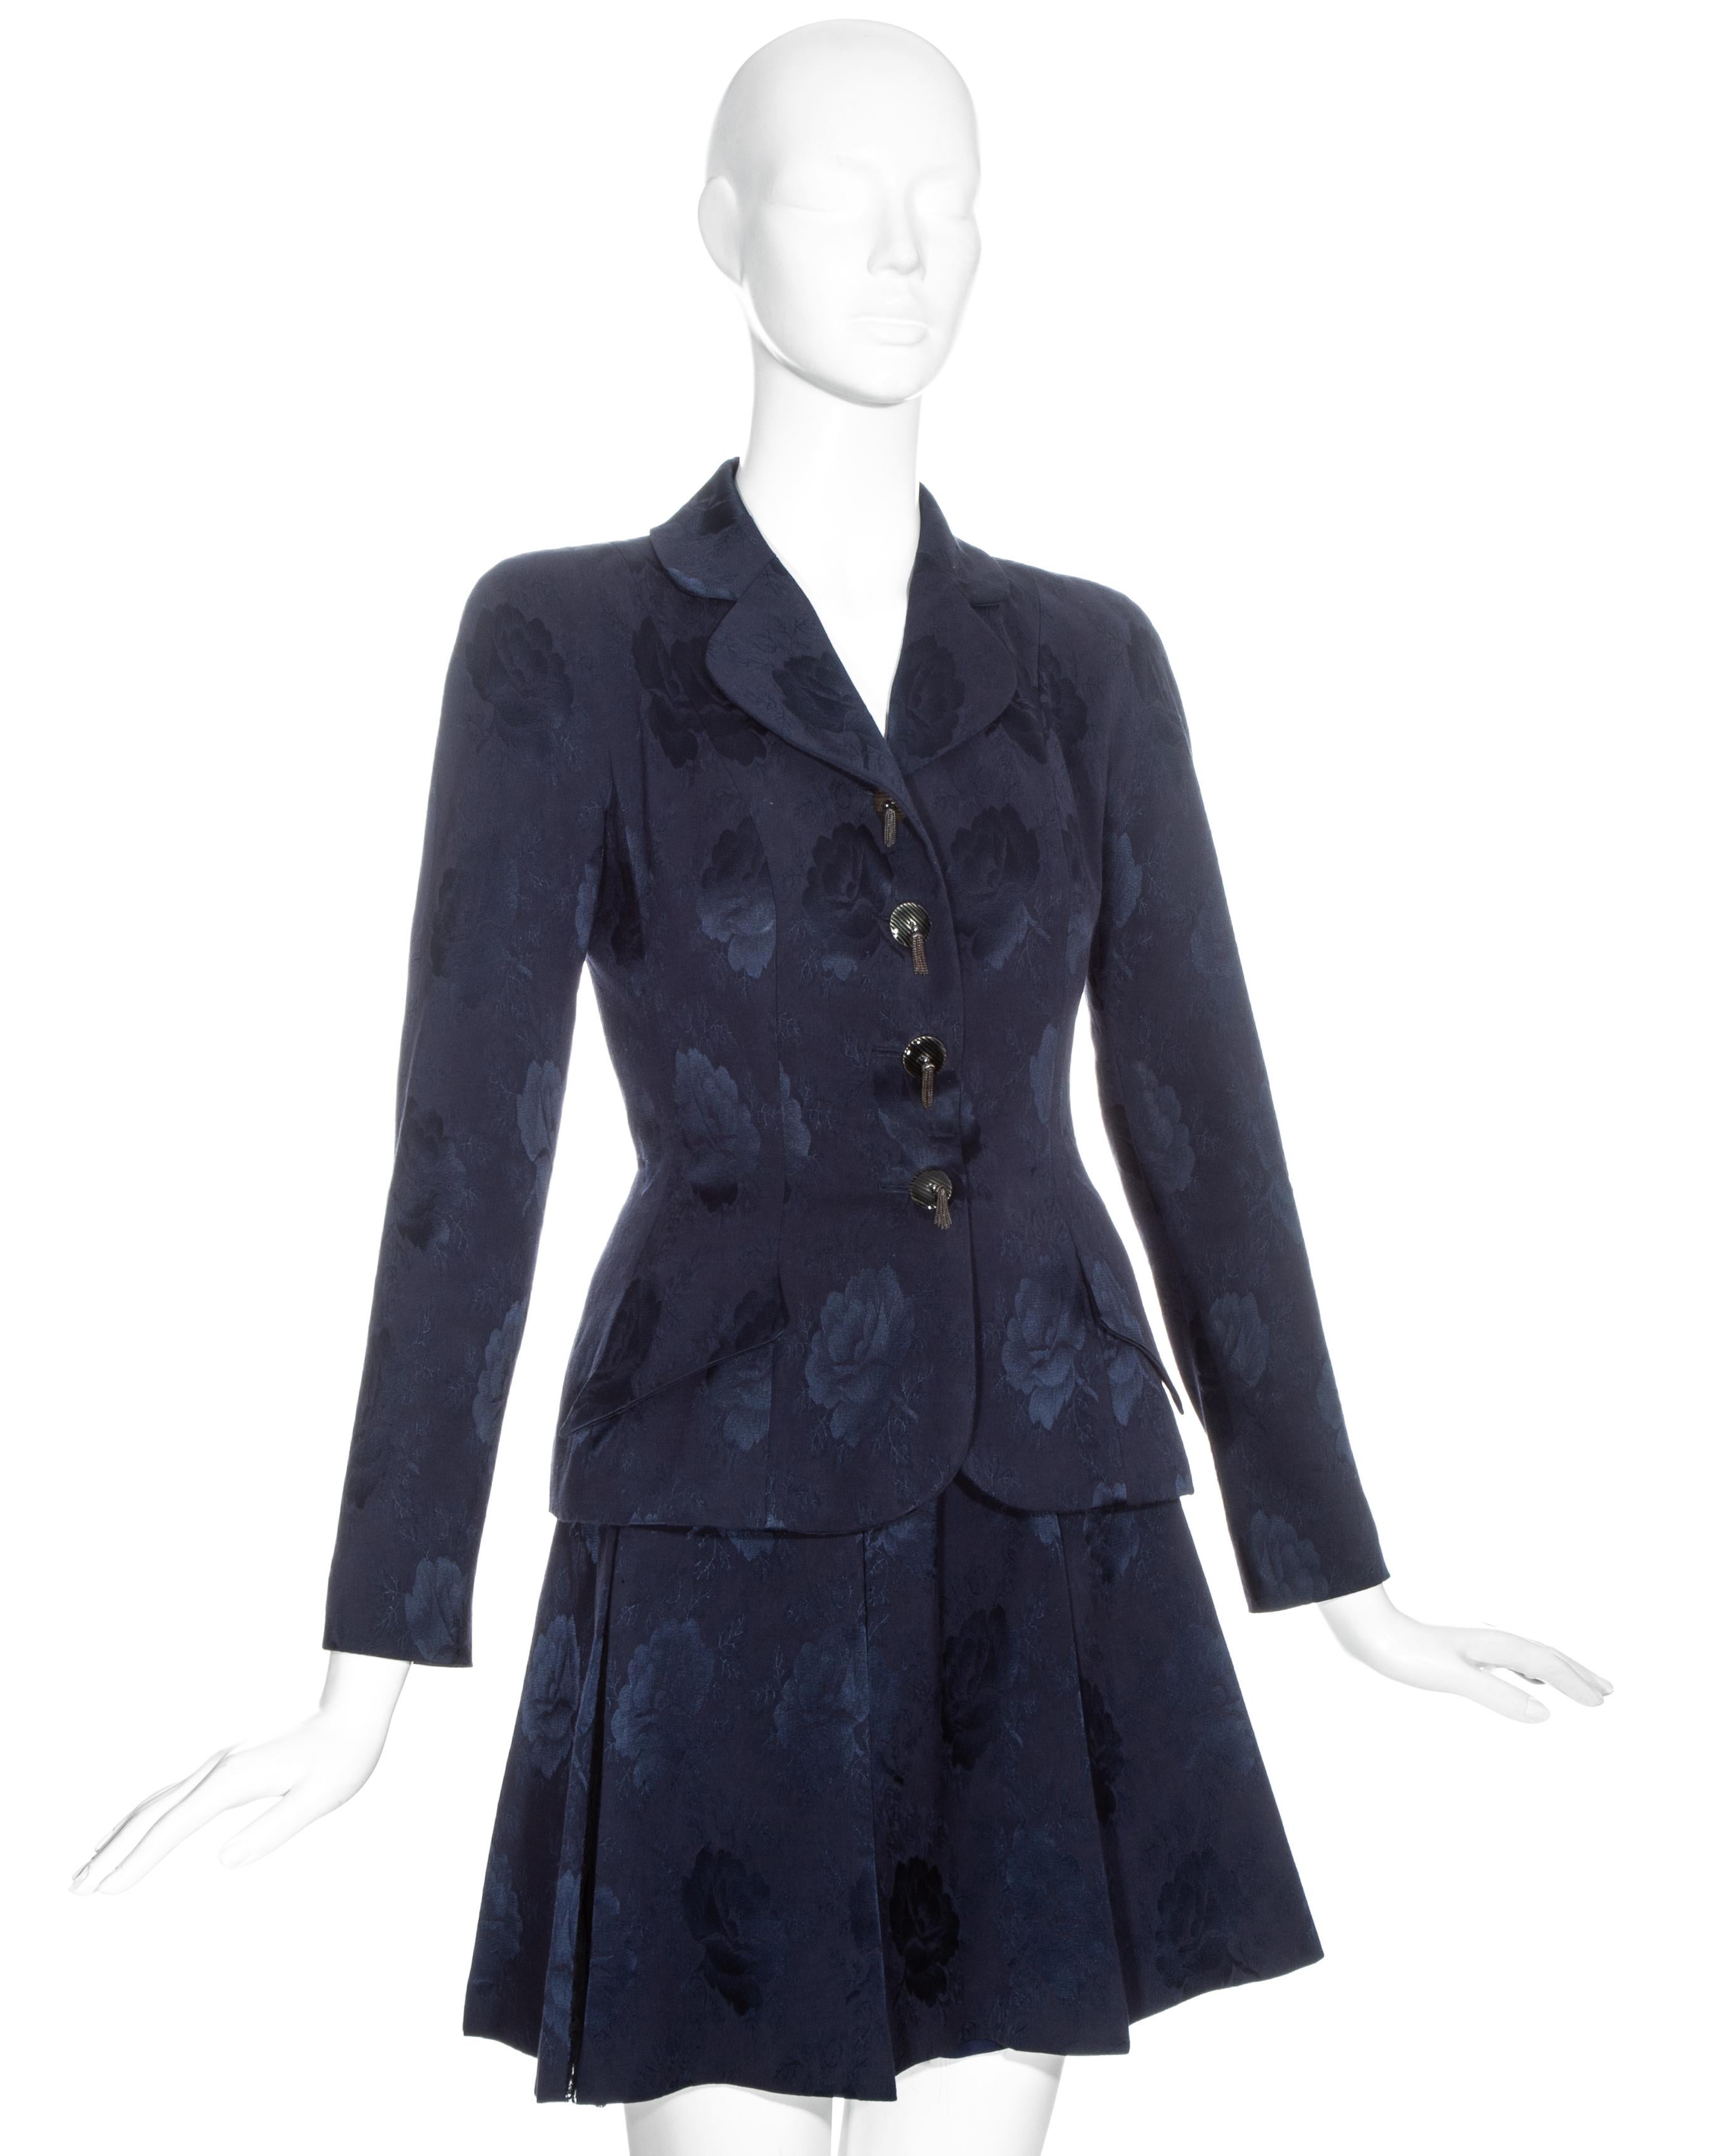 Women's Christian Dior by John Galliano navy silk brocade and lace skirt suit, fw 1997